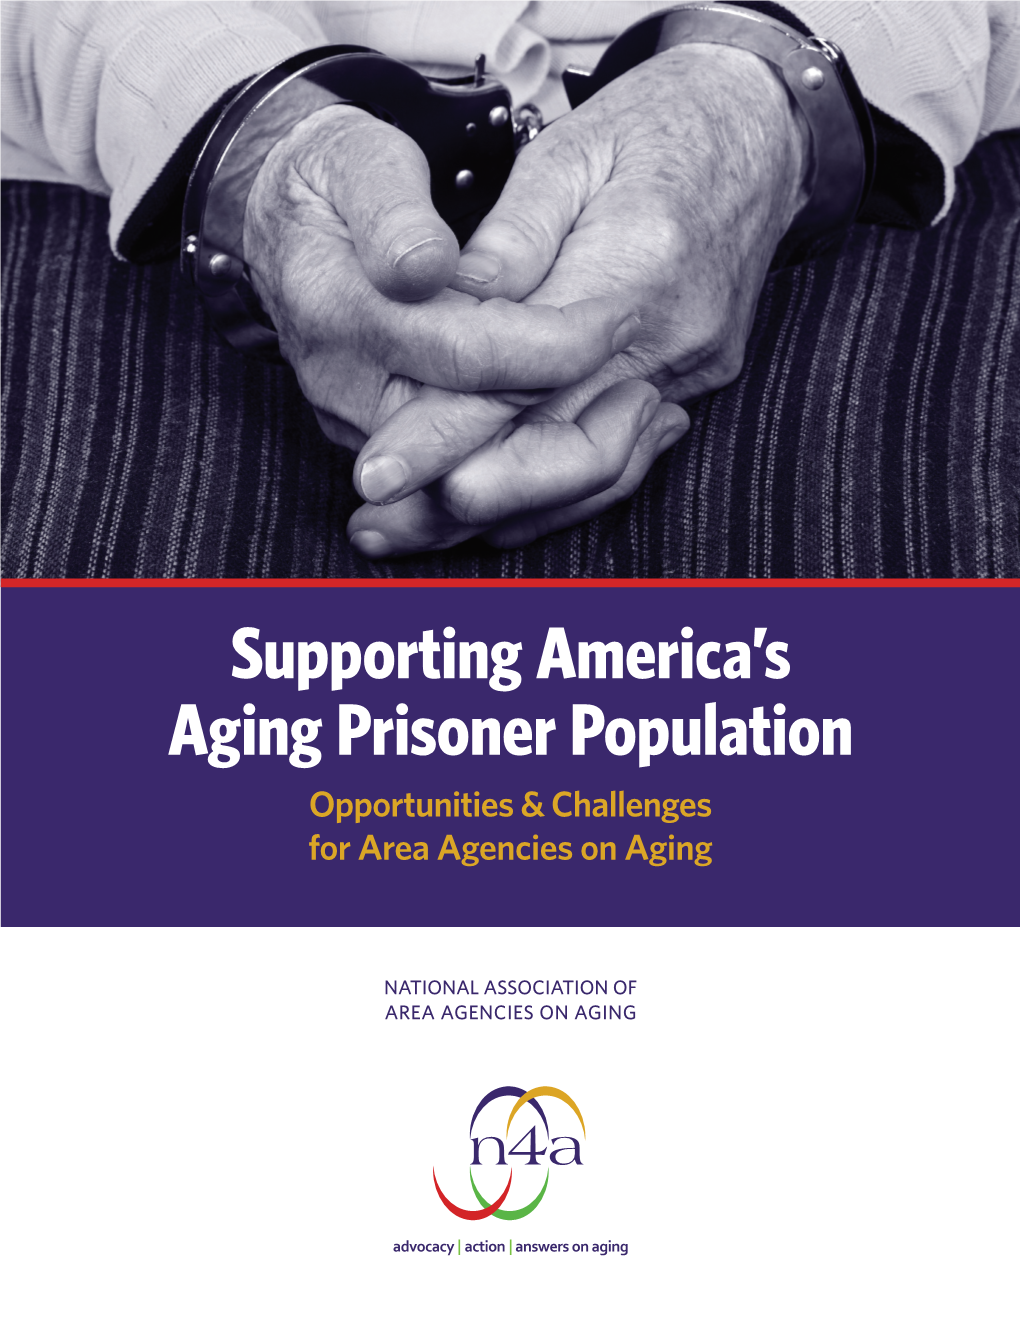 Supporting America's Aging Prisoner Population: Opportunities & Challenges for Area Agencies on Aging